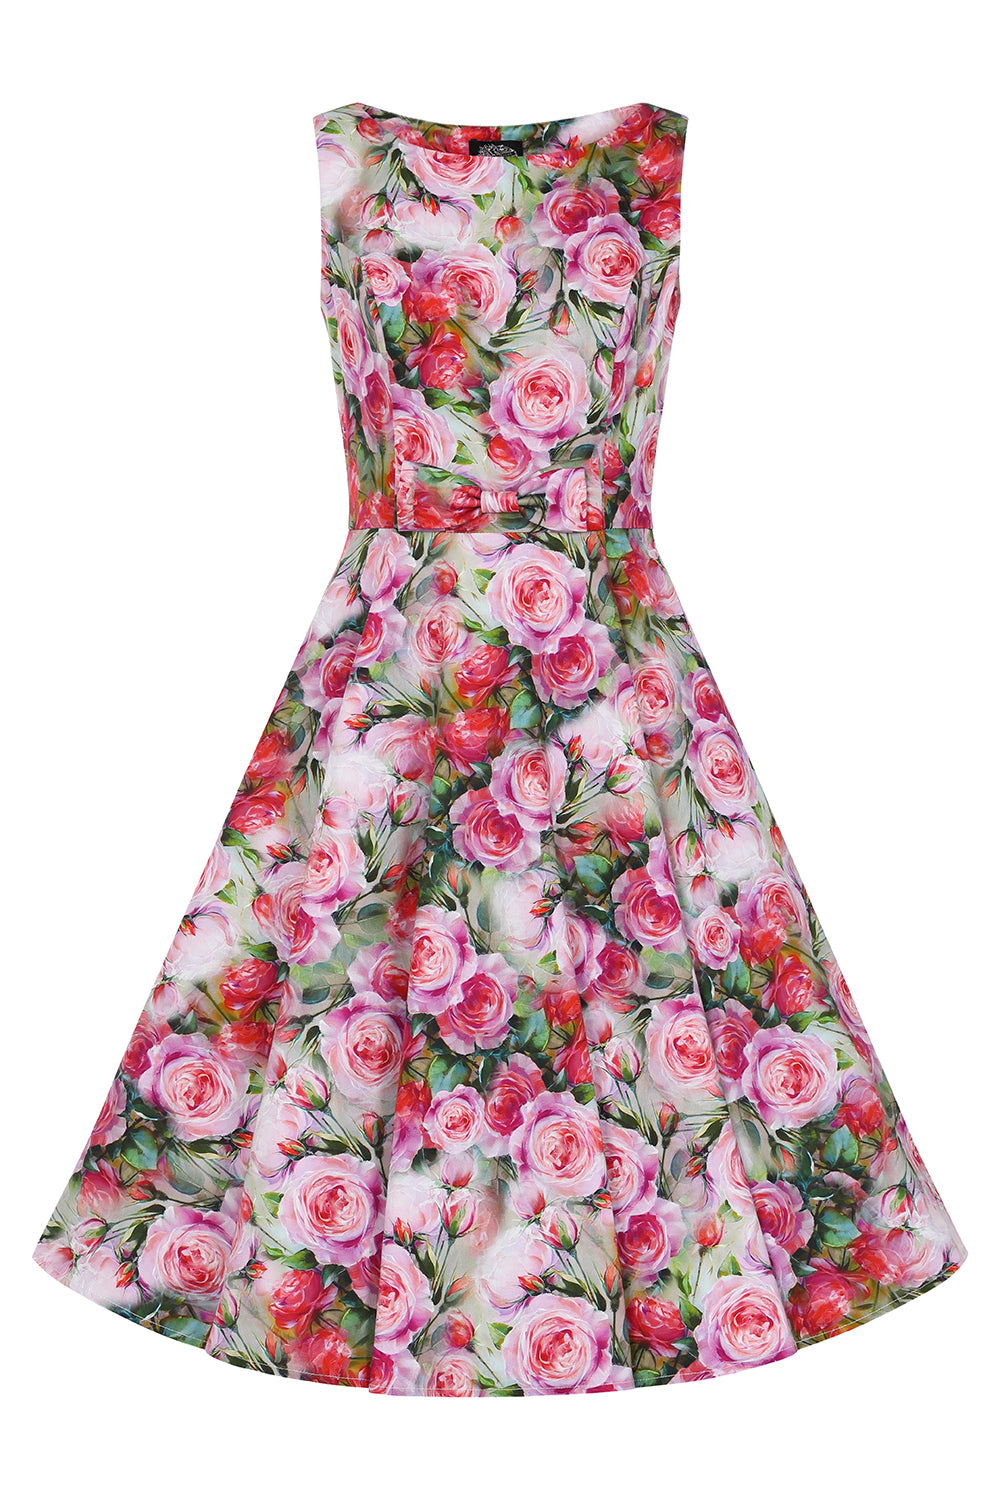 Boat neck 50s style swing dress with pink roses all over 